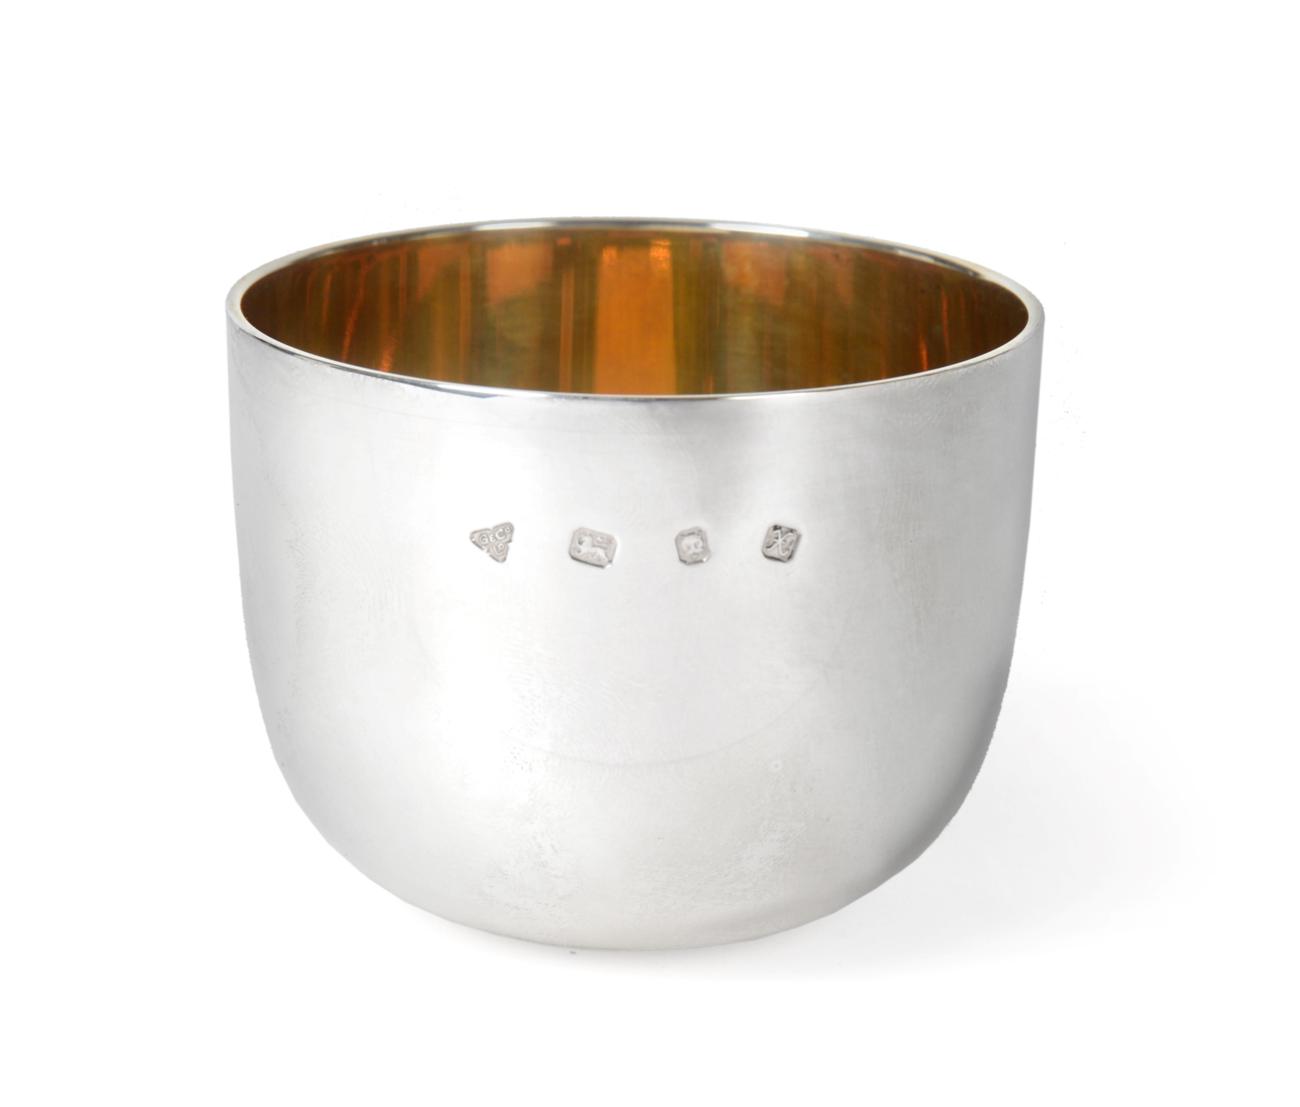 Lot 3141 - An Elizabeth II Silver Tumbler-Cup, by Garrard, London, 1997, of typical form, the interior gilded